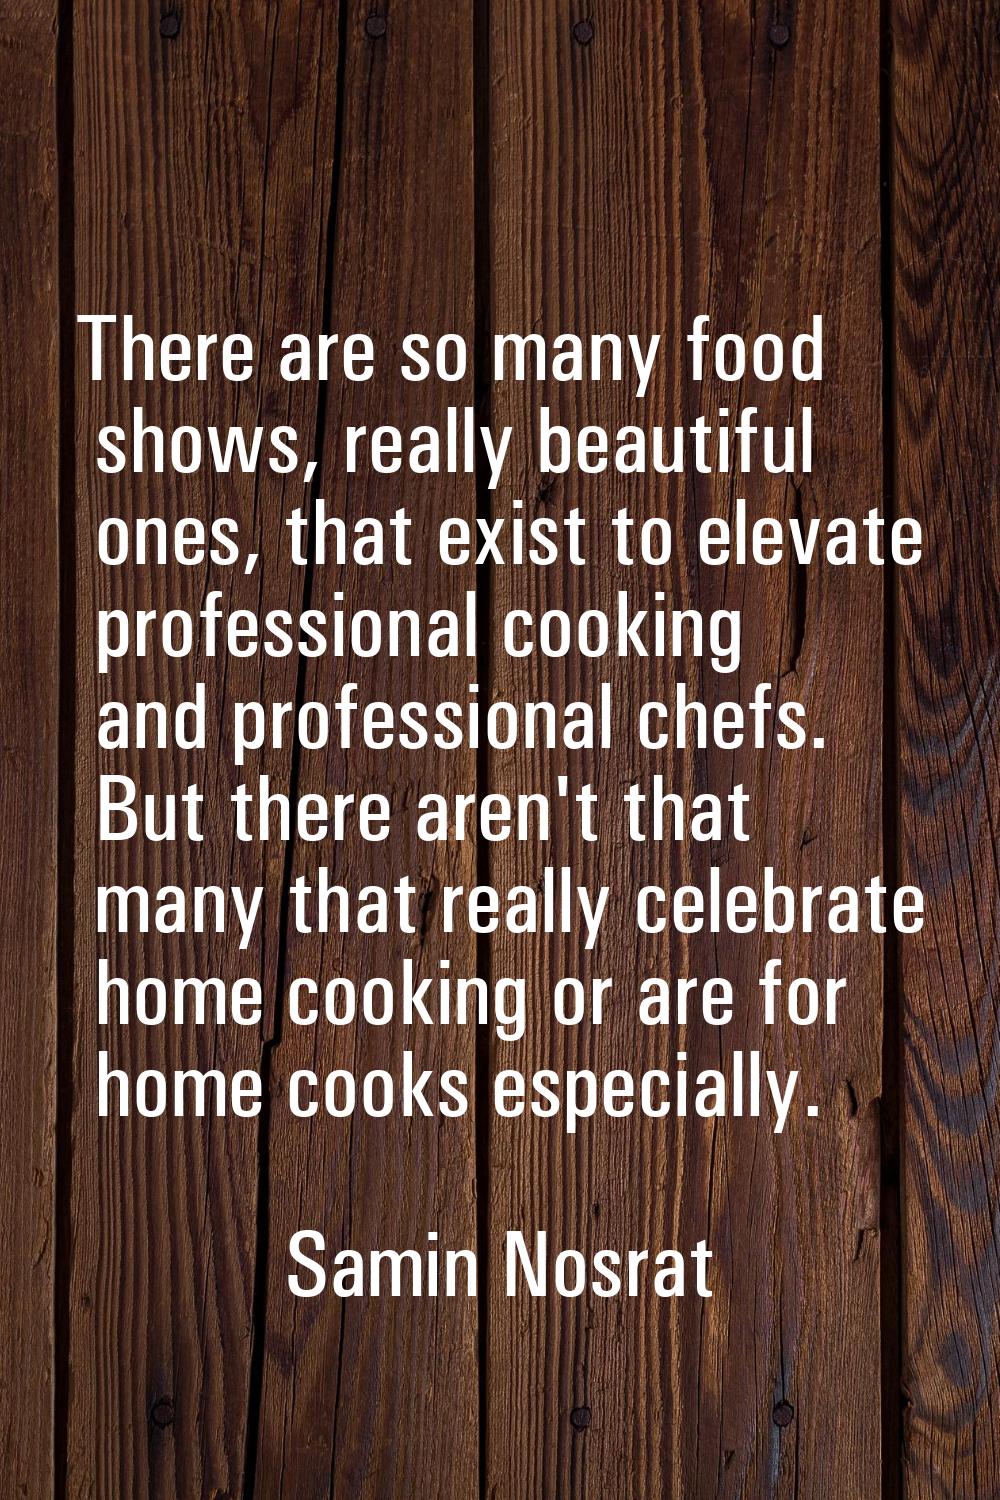 There are so many food shows, really beautiful ones, that exist to elevate professional cooking and